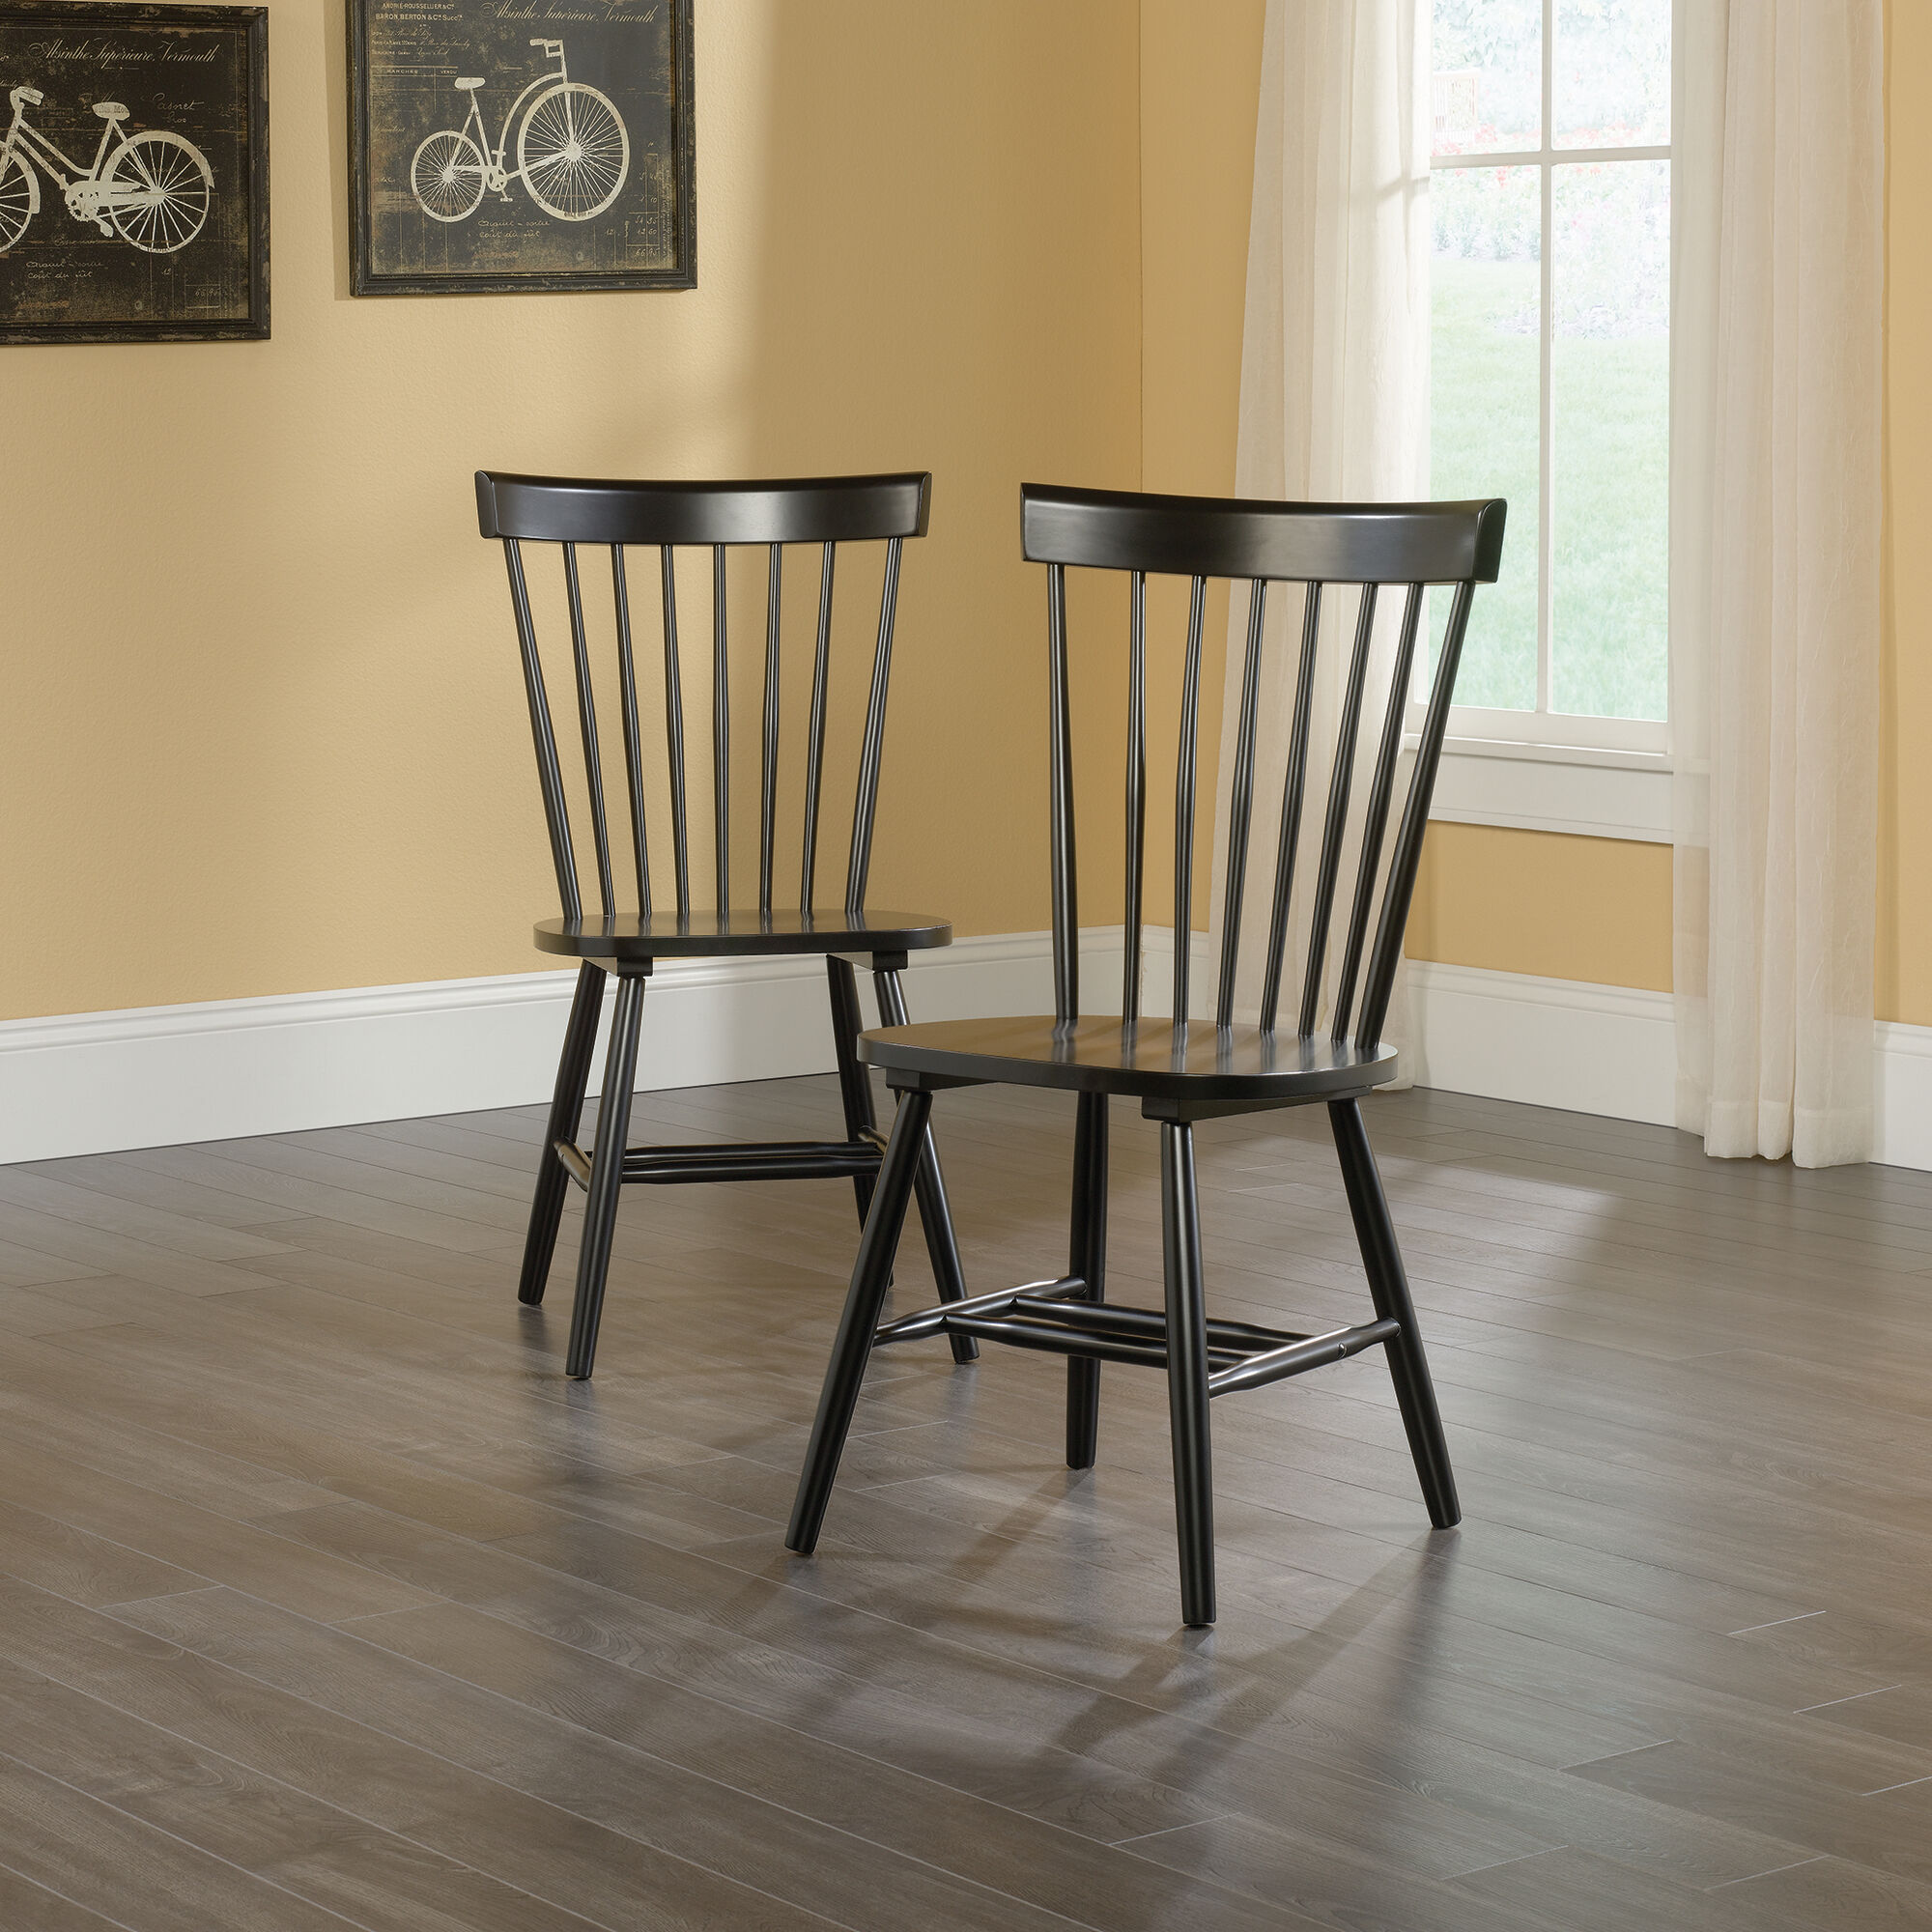 TwoPiece Solid Wood 36'' Spindle Chair Set in Black